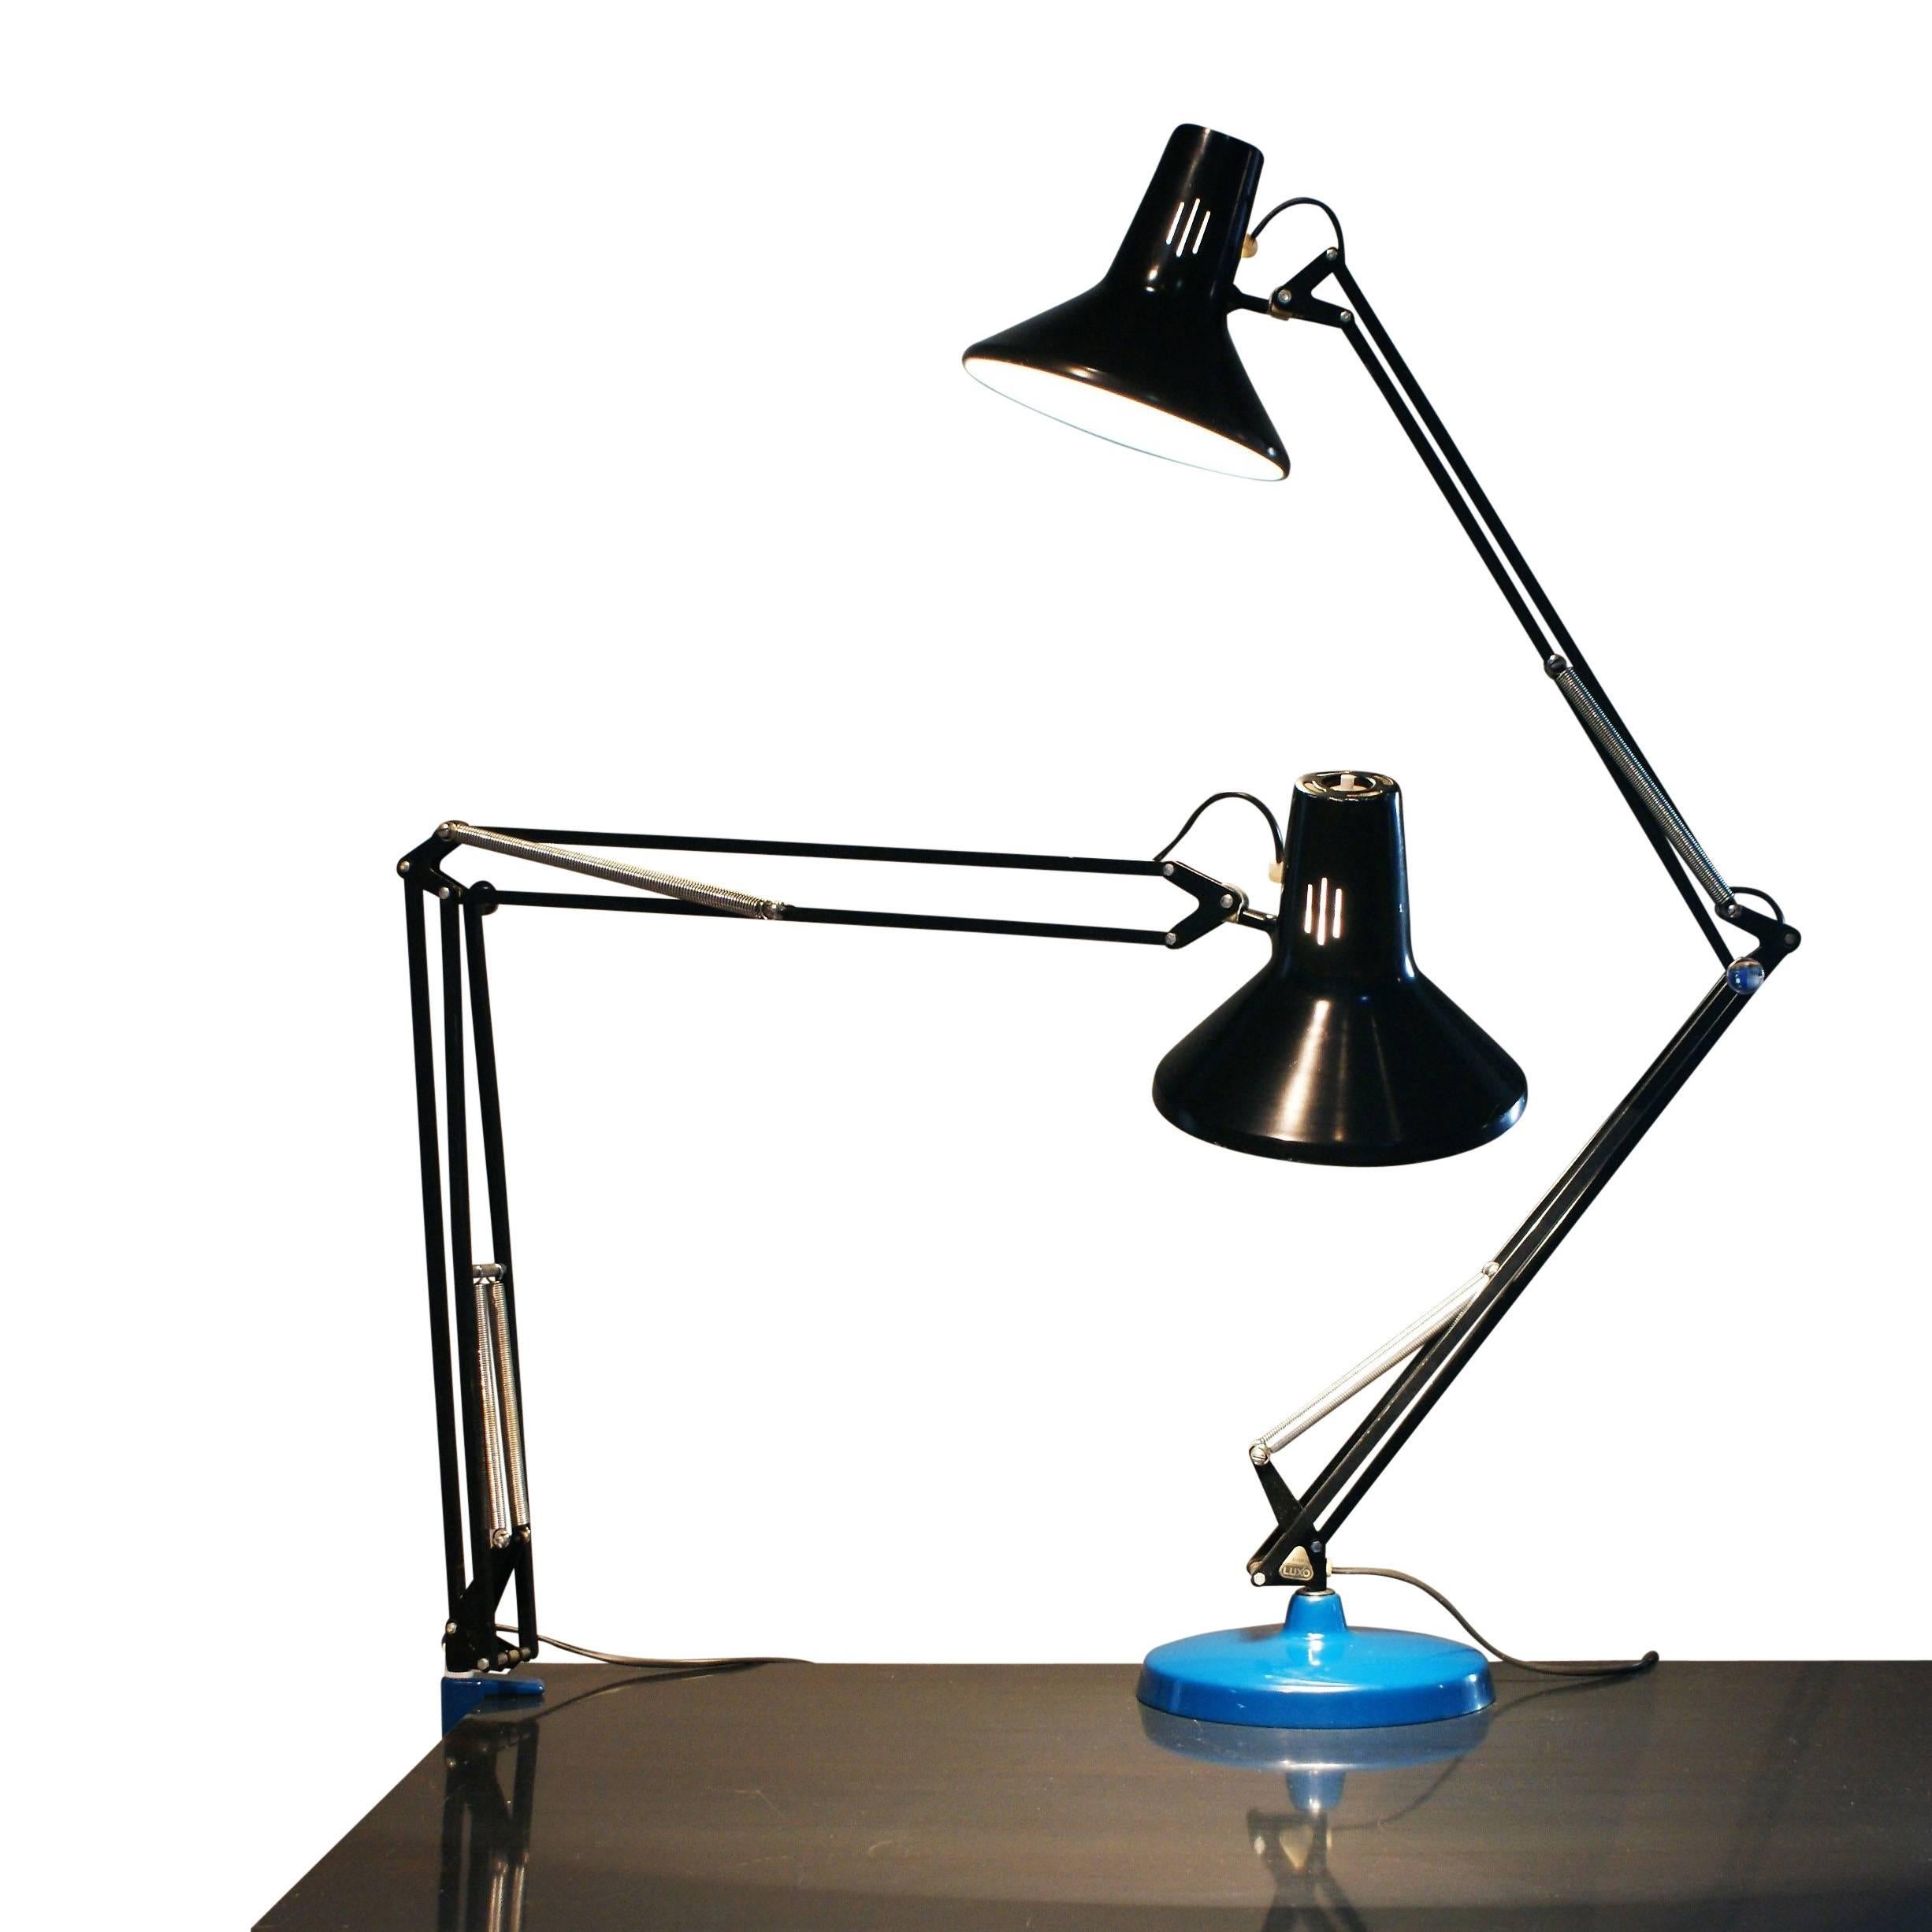 An iconic L-1P vintage Luxo architect's lamp. Great industrial design with clean modern lines in a classic black color - looks great on a desk. Made by the Luxo lighting company in Norway. The L-1 was designed by Jac Jacobsen in 1937.

Design